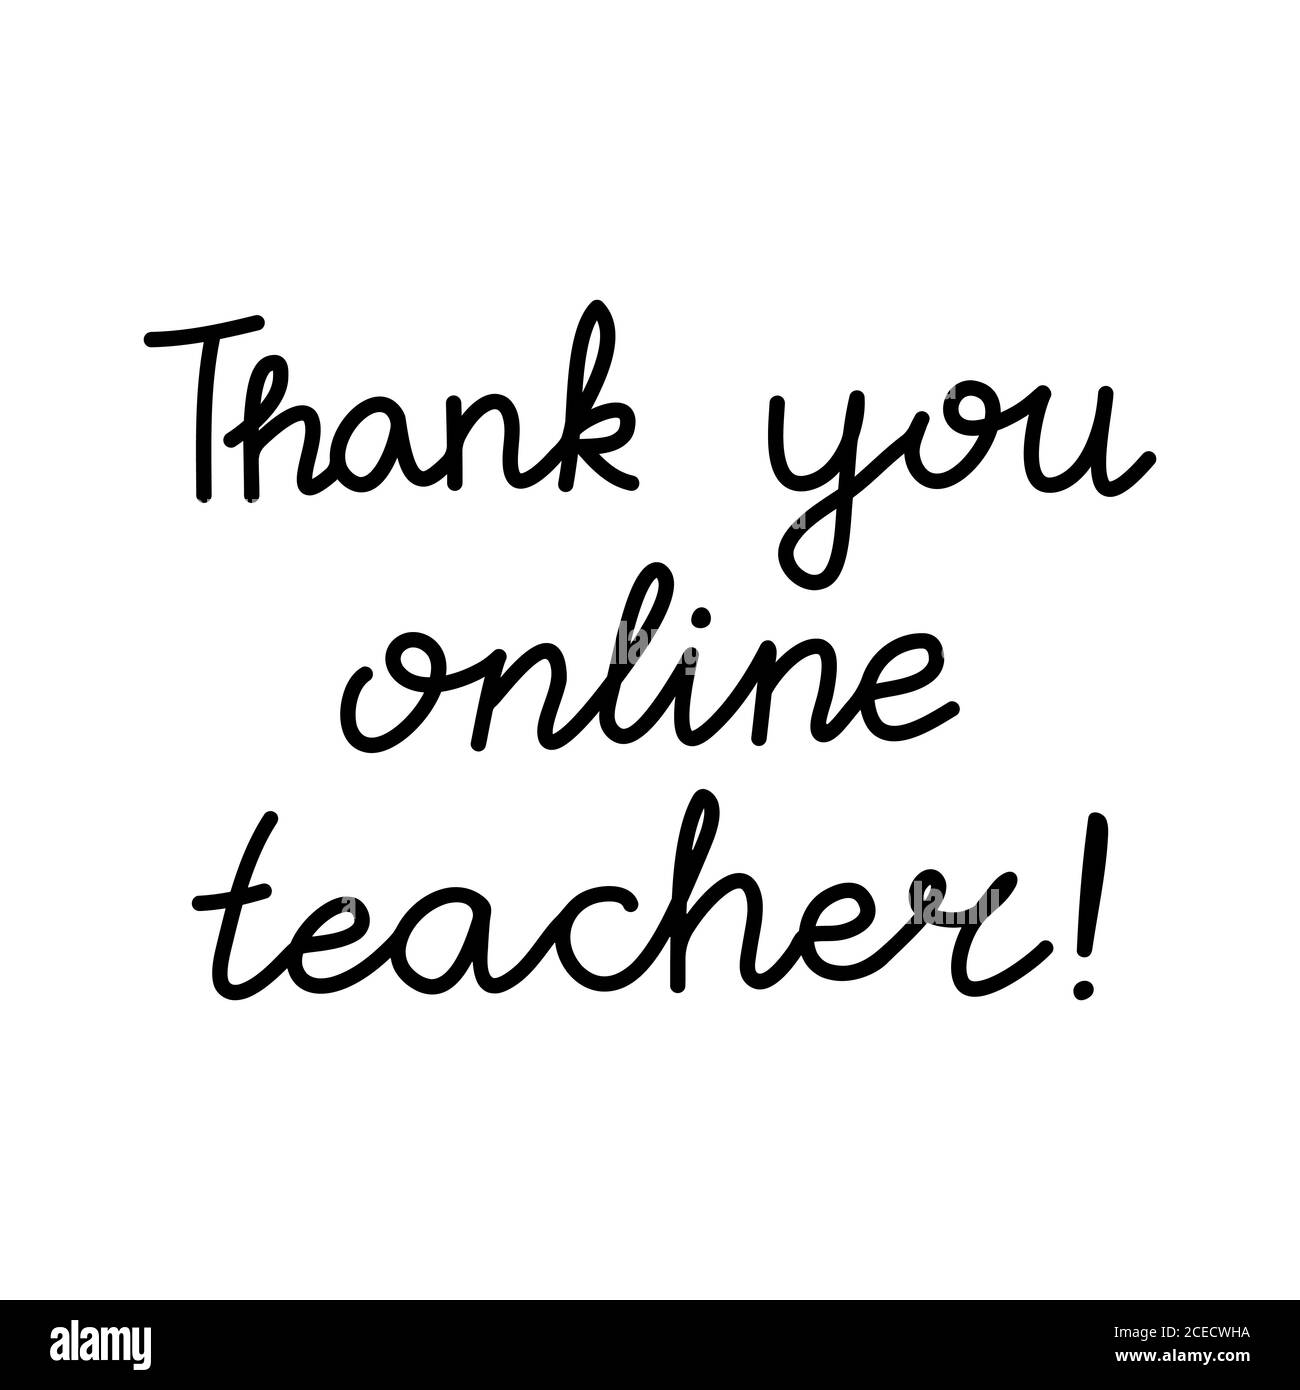 Thank you online teacher. Education quote. hildish handwriting. Isolated on white background. Vector stock illustration. Stock Vector